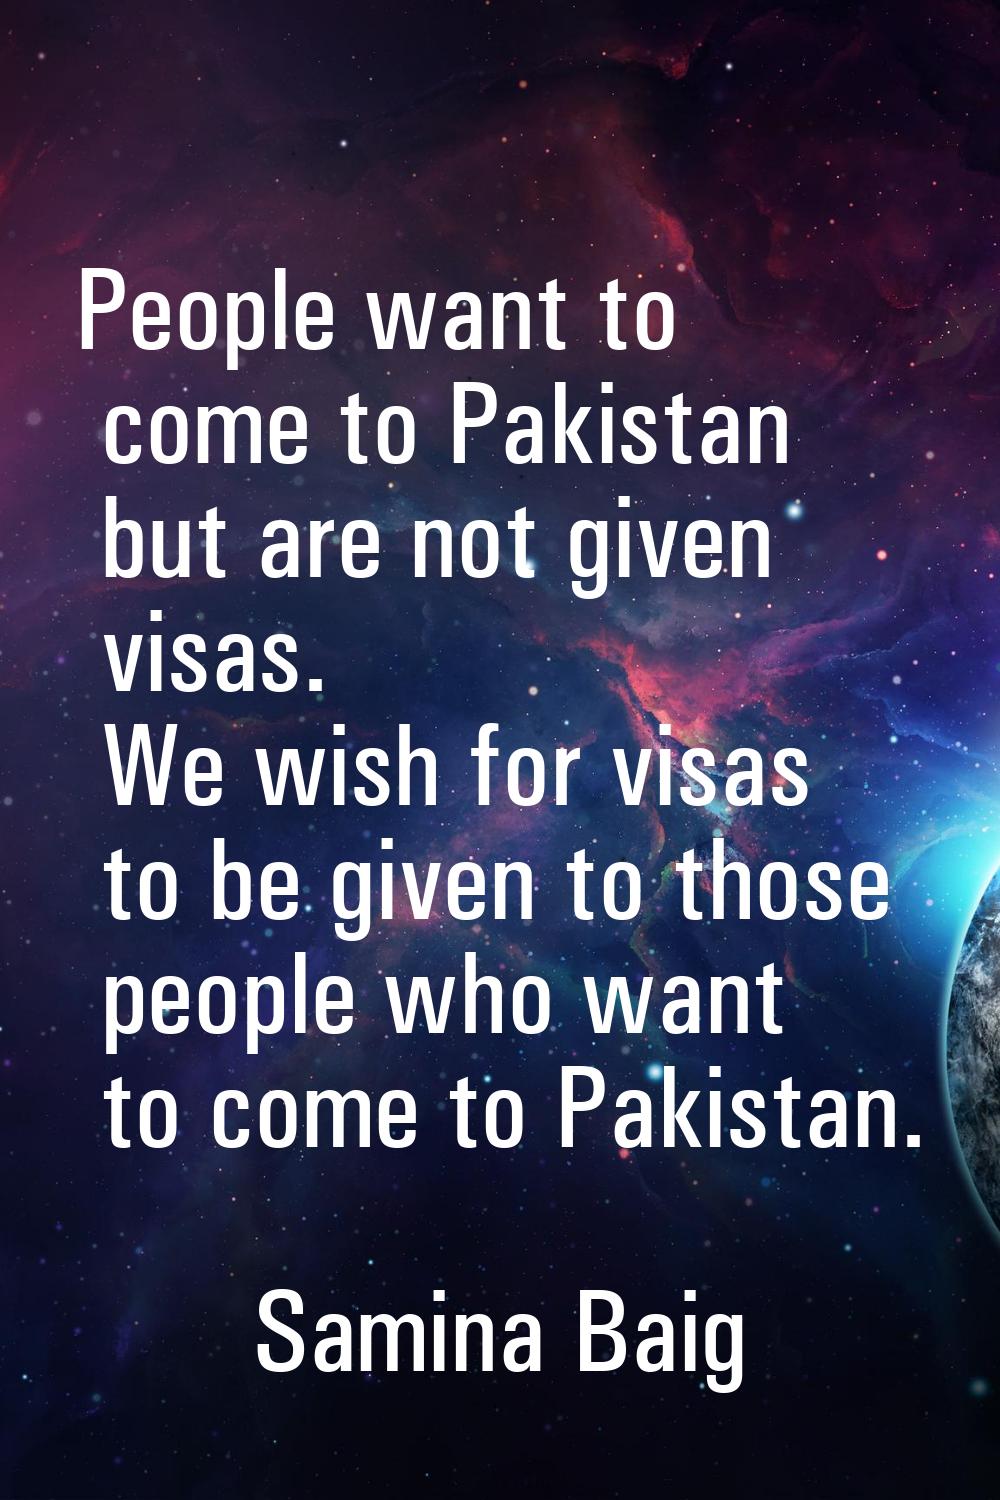 People want to come to Pakistan but are not given visas. We wish for visas to be given to those peo